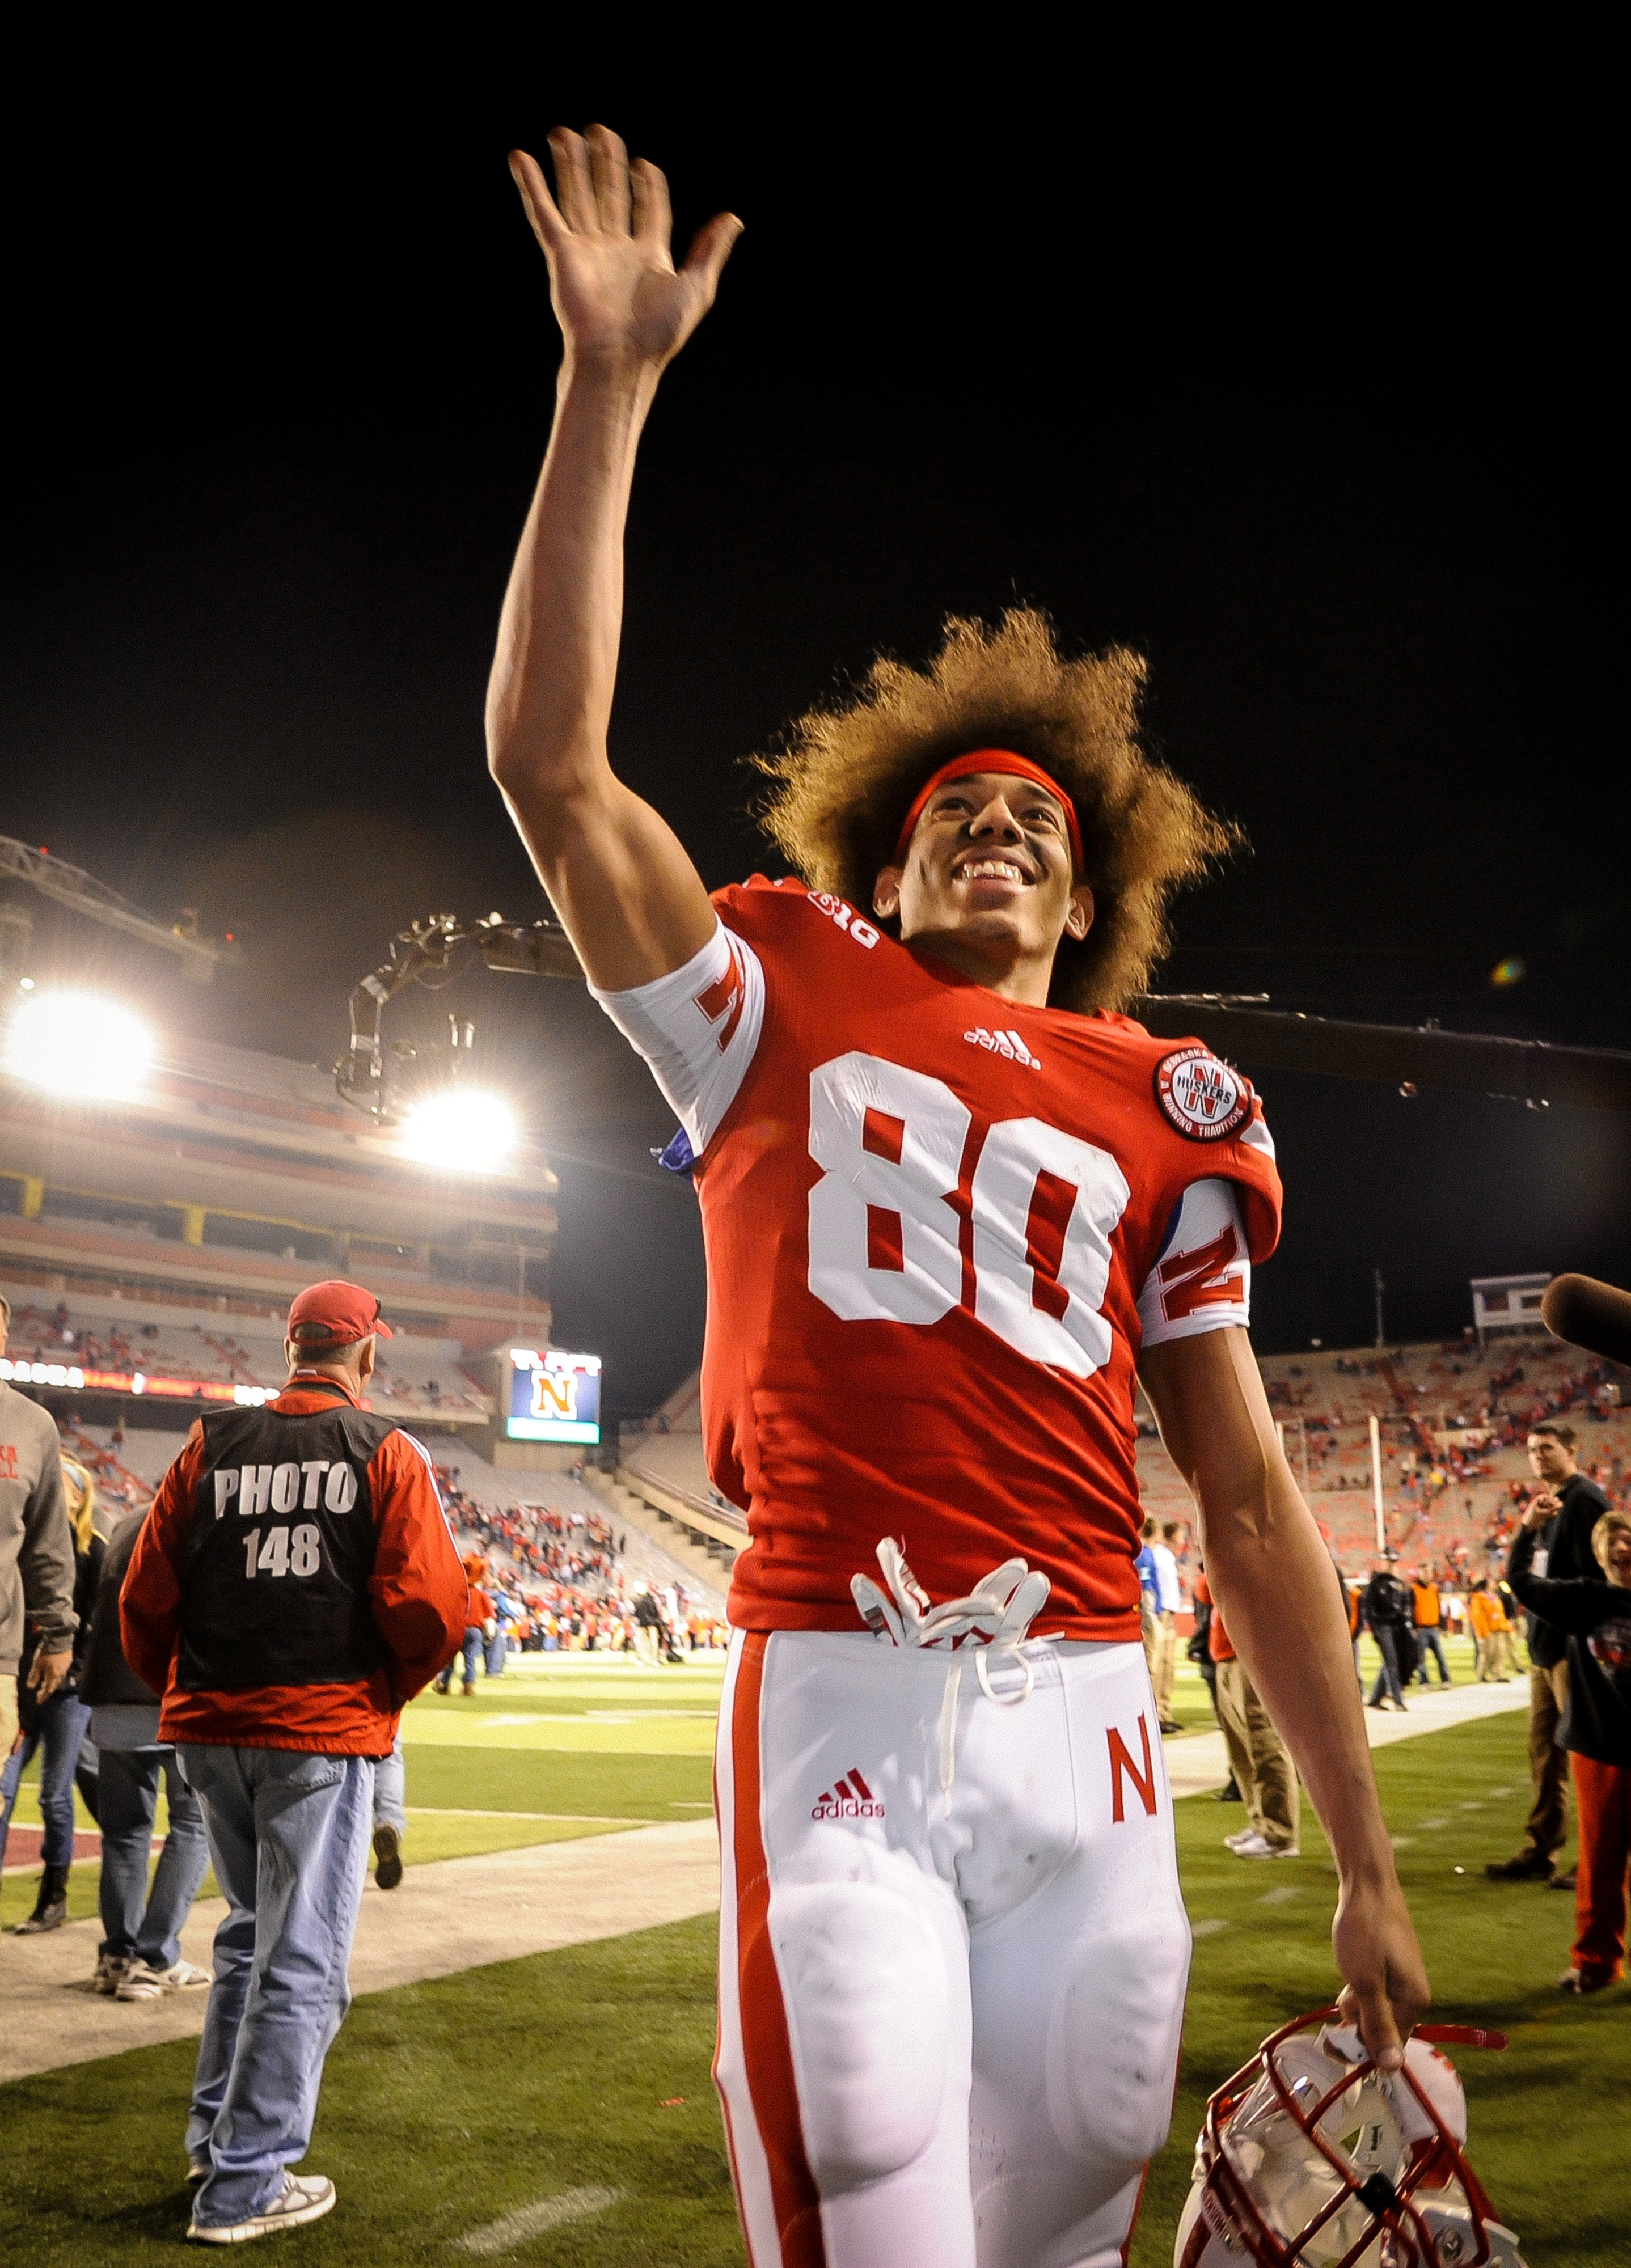 Kenny Bell welcomes the class of '13 to Lincoln? Sure. 